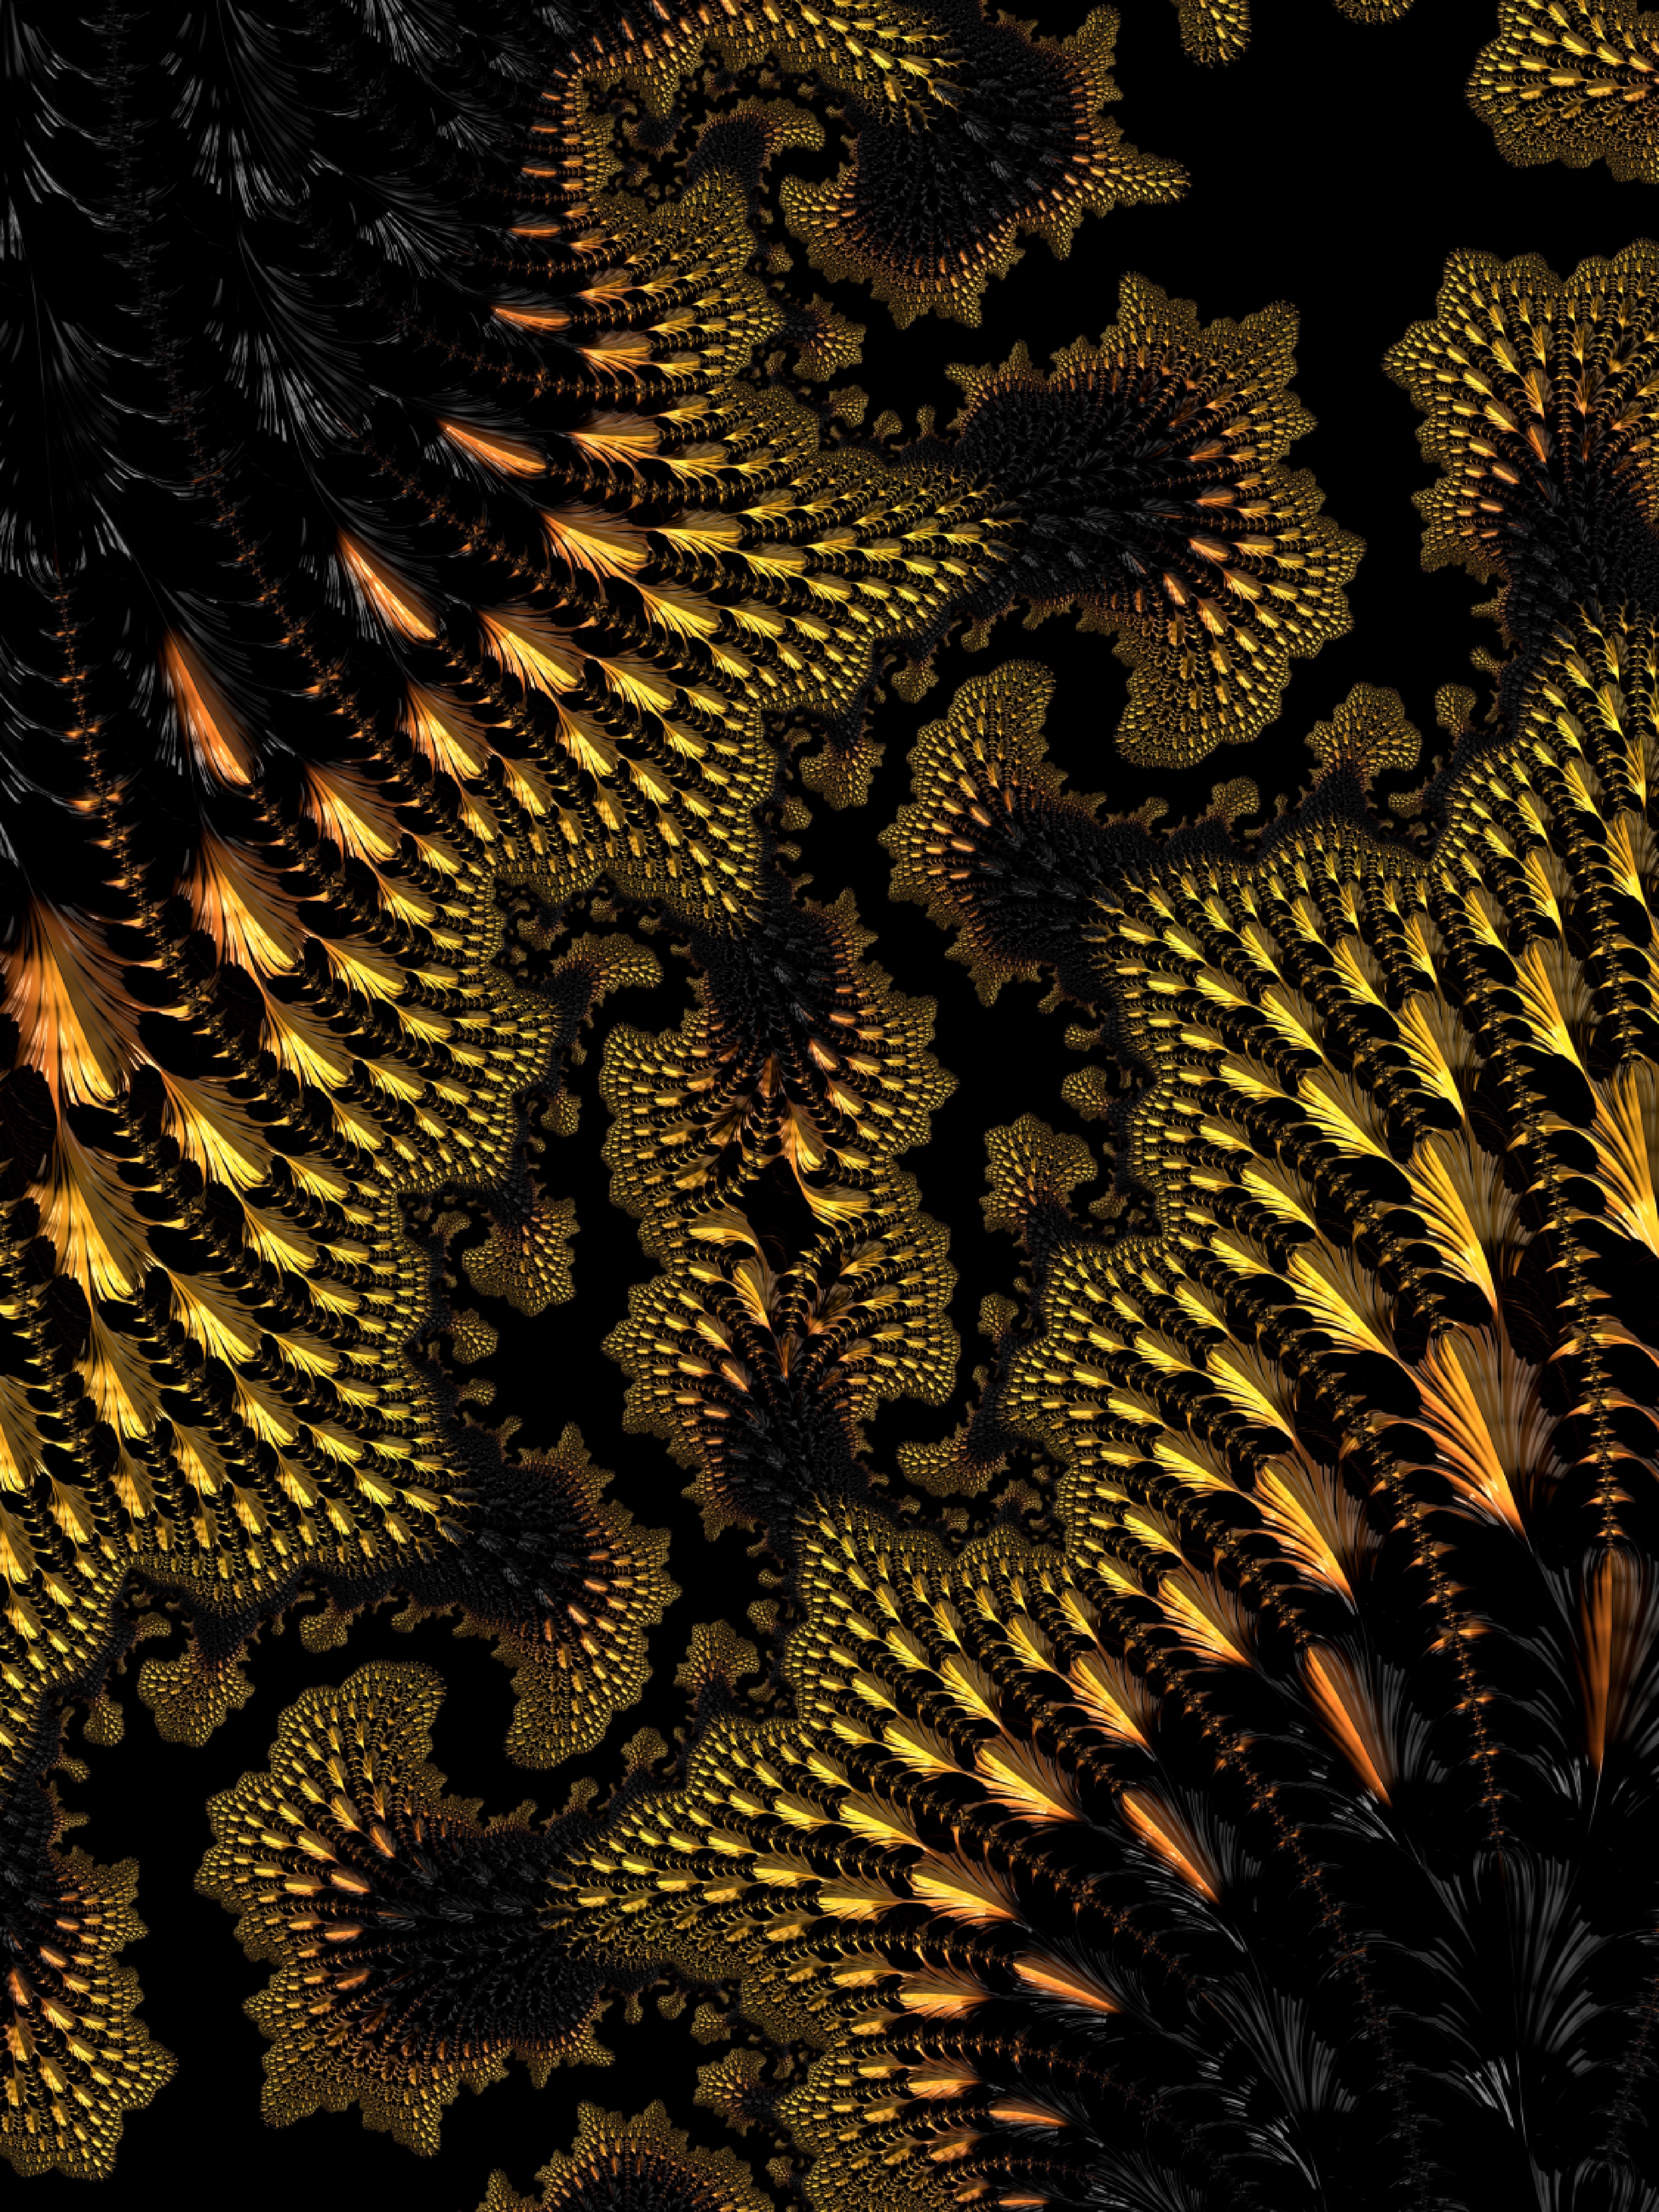 fractal, 3d, abstract, black, yellow, winding, sinuous, ornate iphone wallpaper